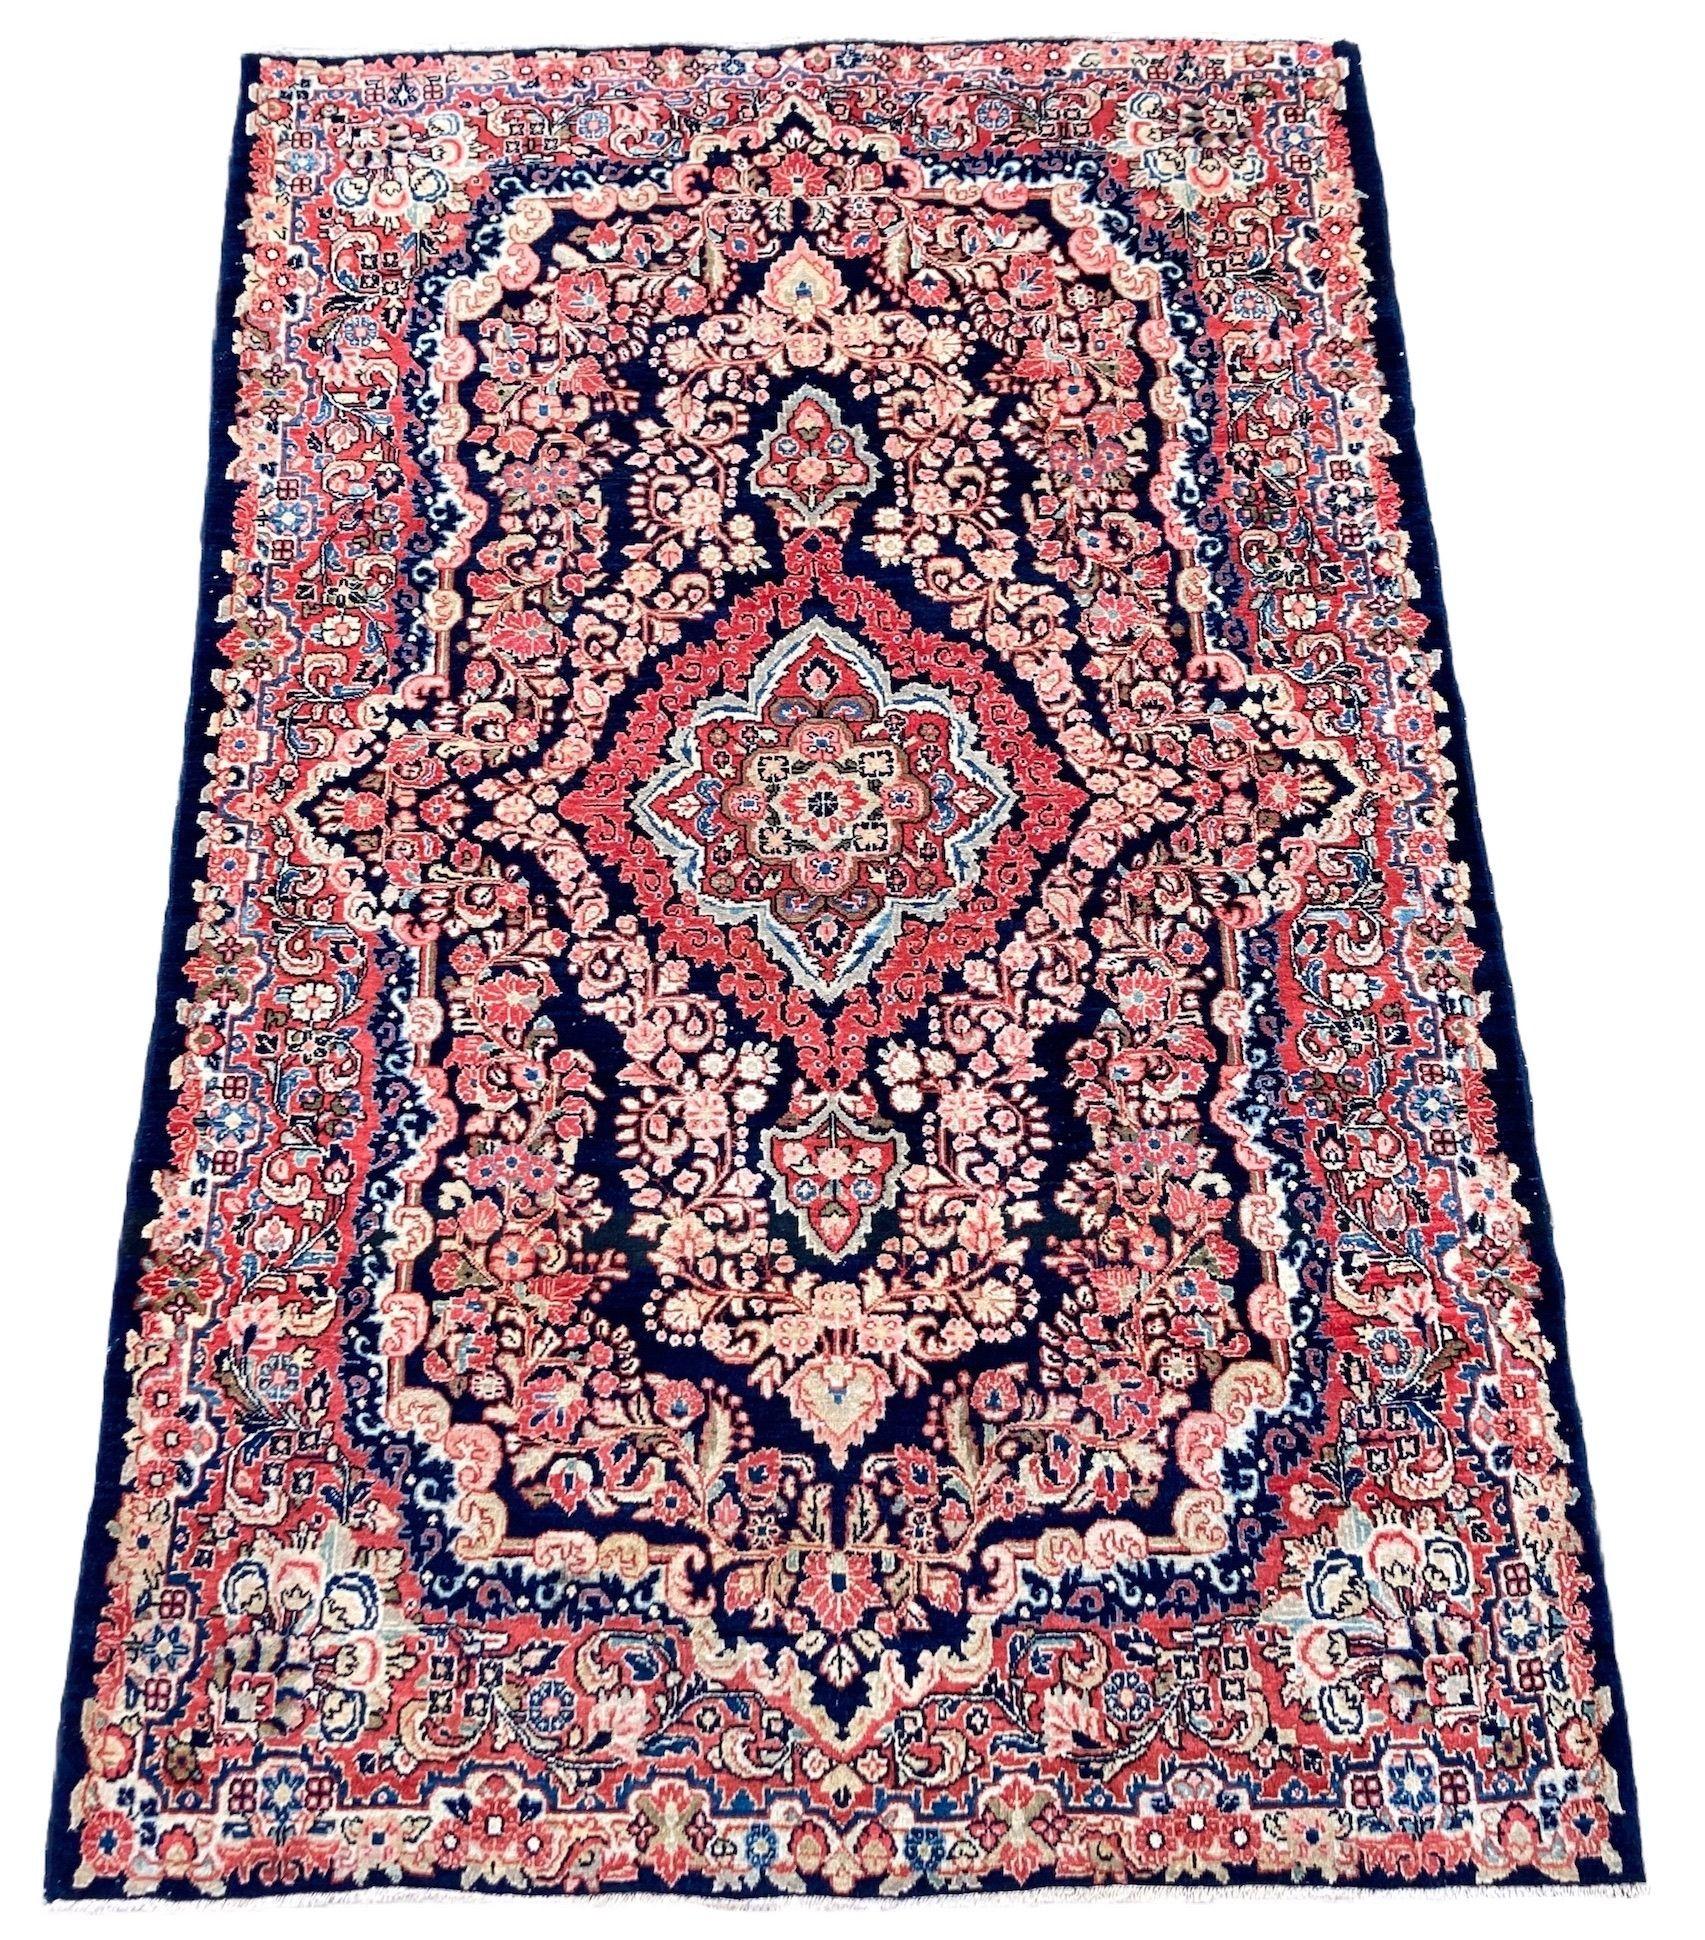 A lovely vintage Sarouk rug, handwoven circa 1940 with a floral medallion on a deep indigo, almost black field surrounded by a free-flowing terracotta border. Finely woven with lovely quality wool and great secondary colours.
Size: 2.06m x 1.35m